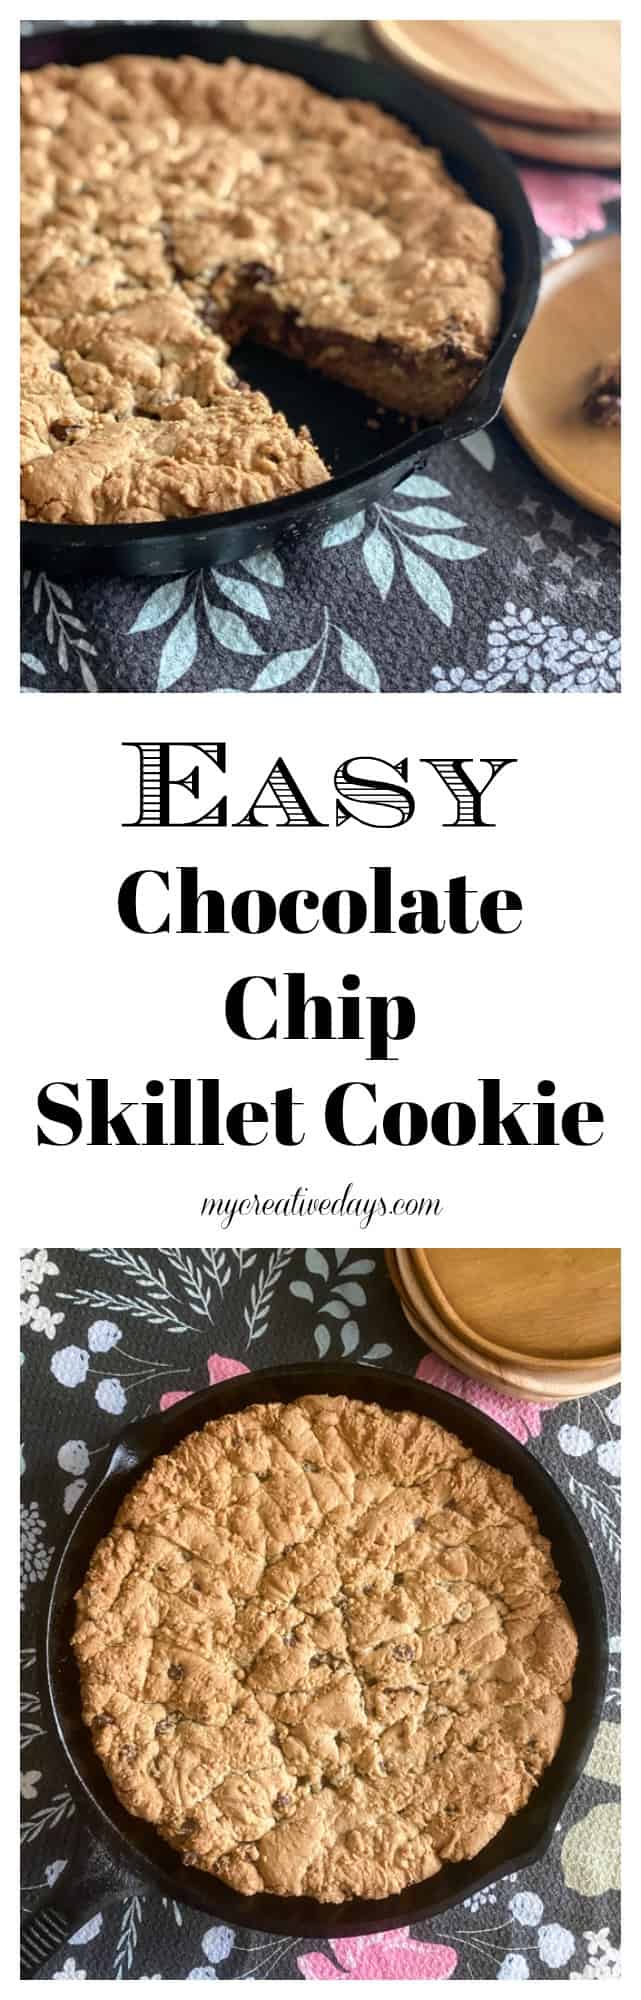 Easy Chocolate Chip Skillet Cookie - My Creative Days